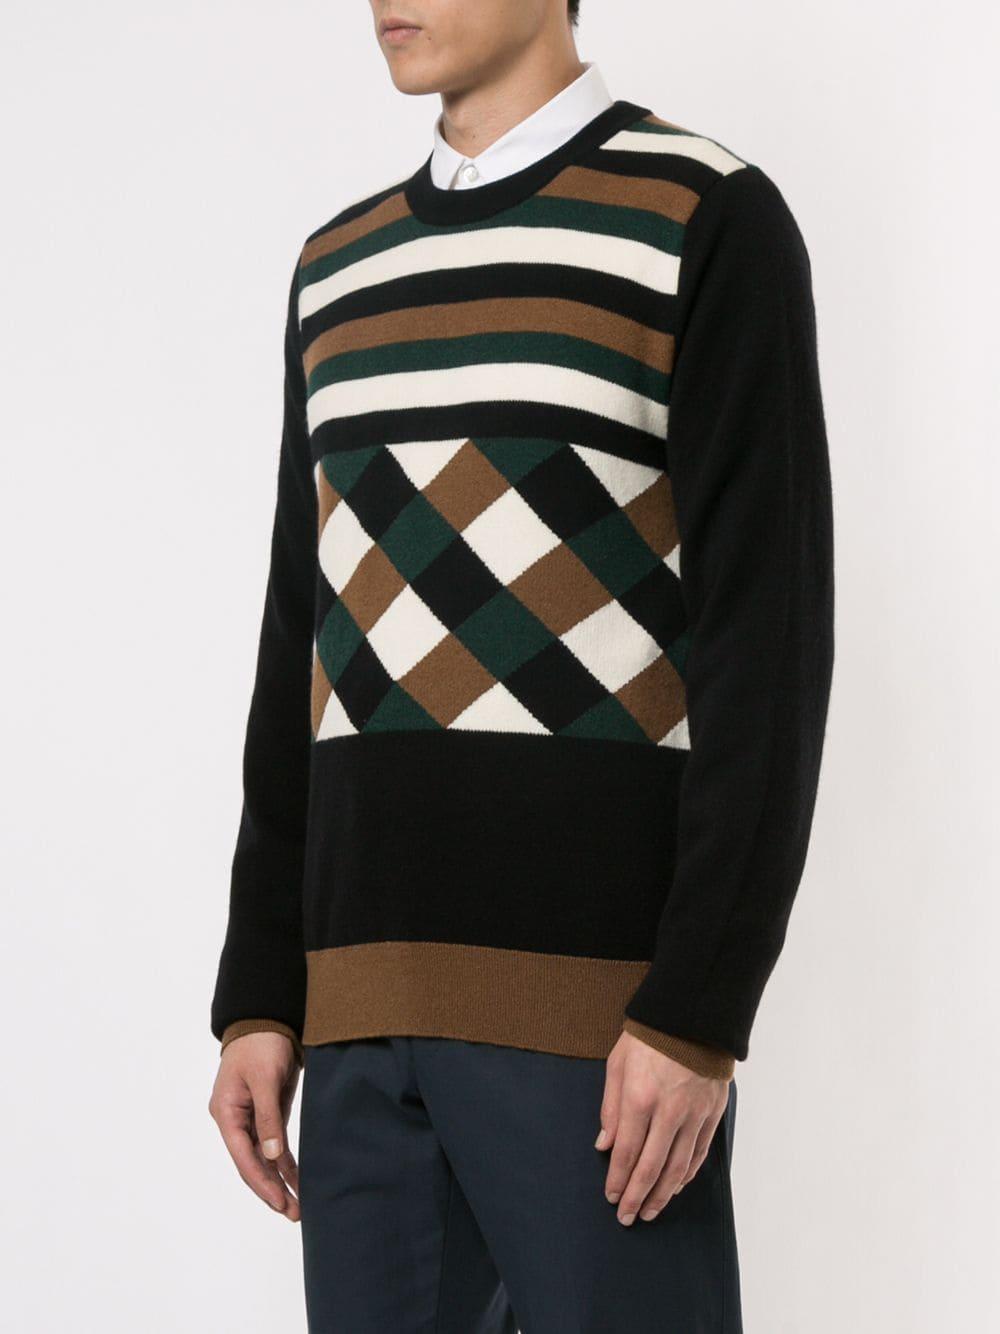 Dolce & Gabbana Cashmere Crew Neck Sweater in Brown for Men - Lyst